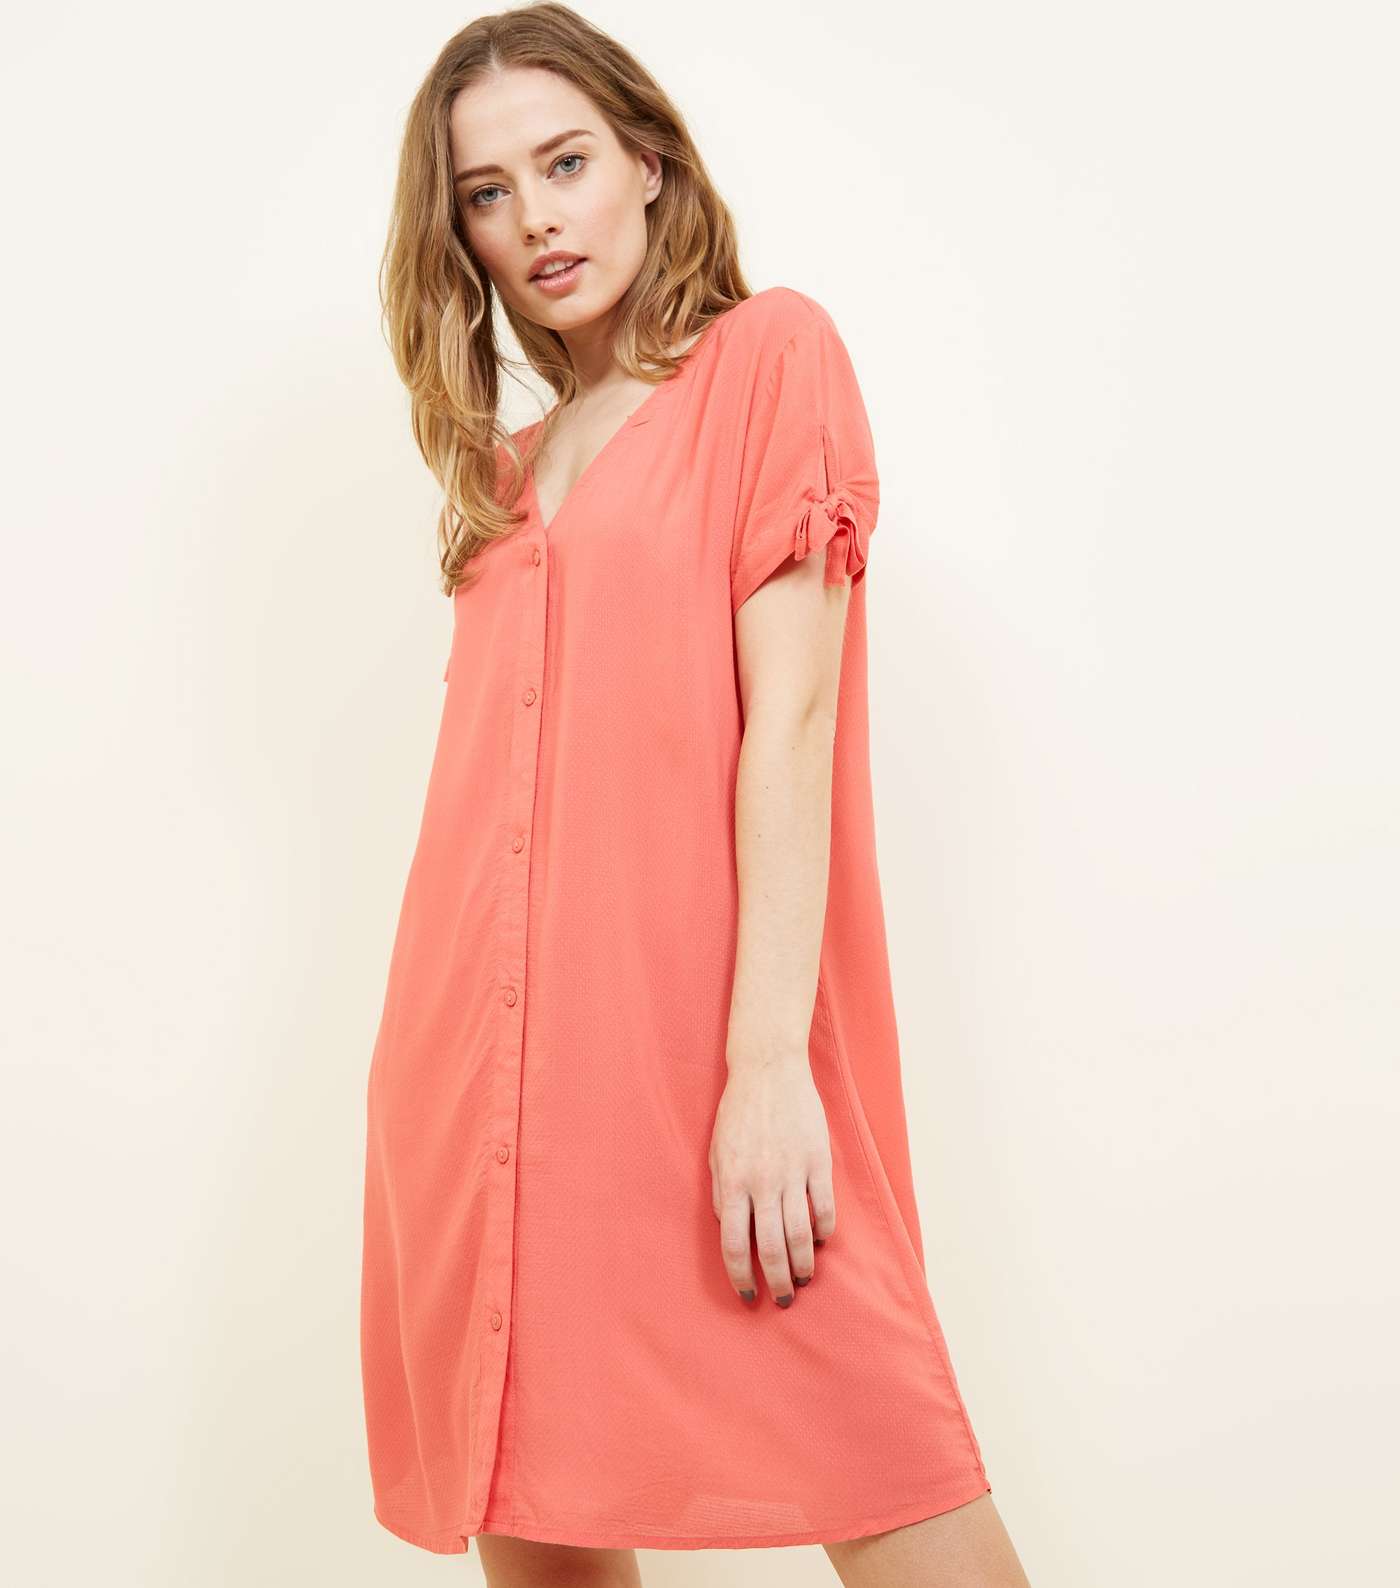 JDY Bright Pink Button Front Dress